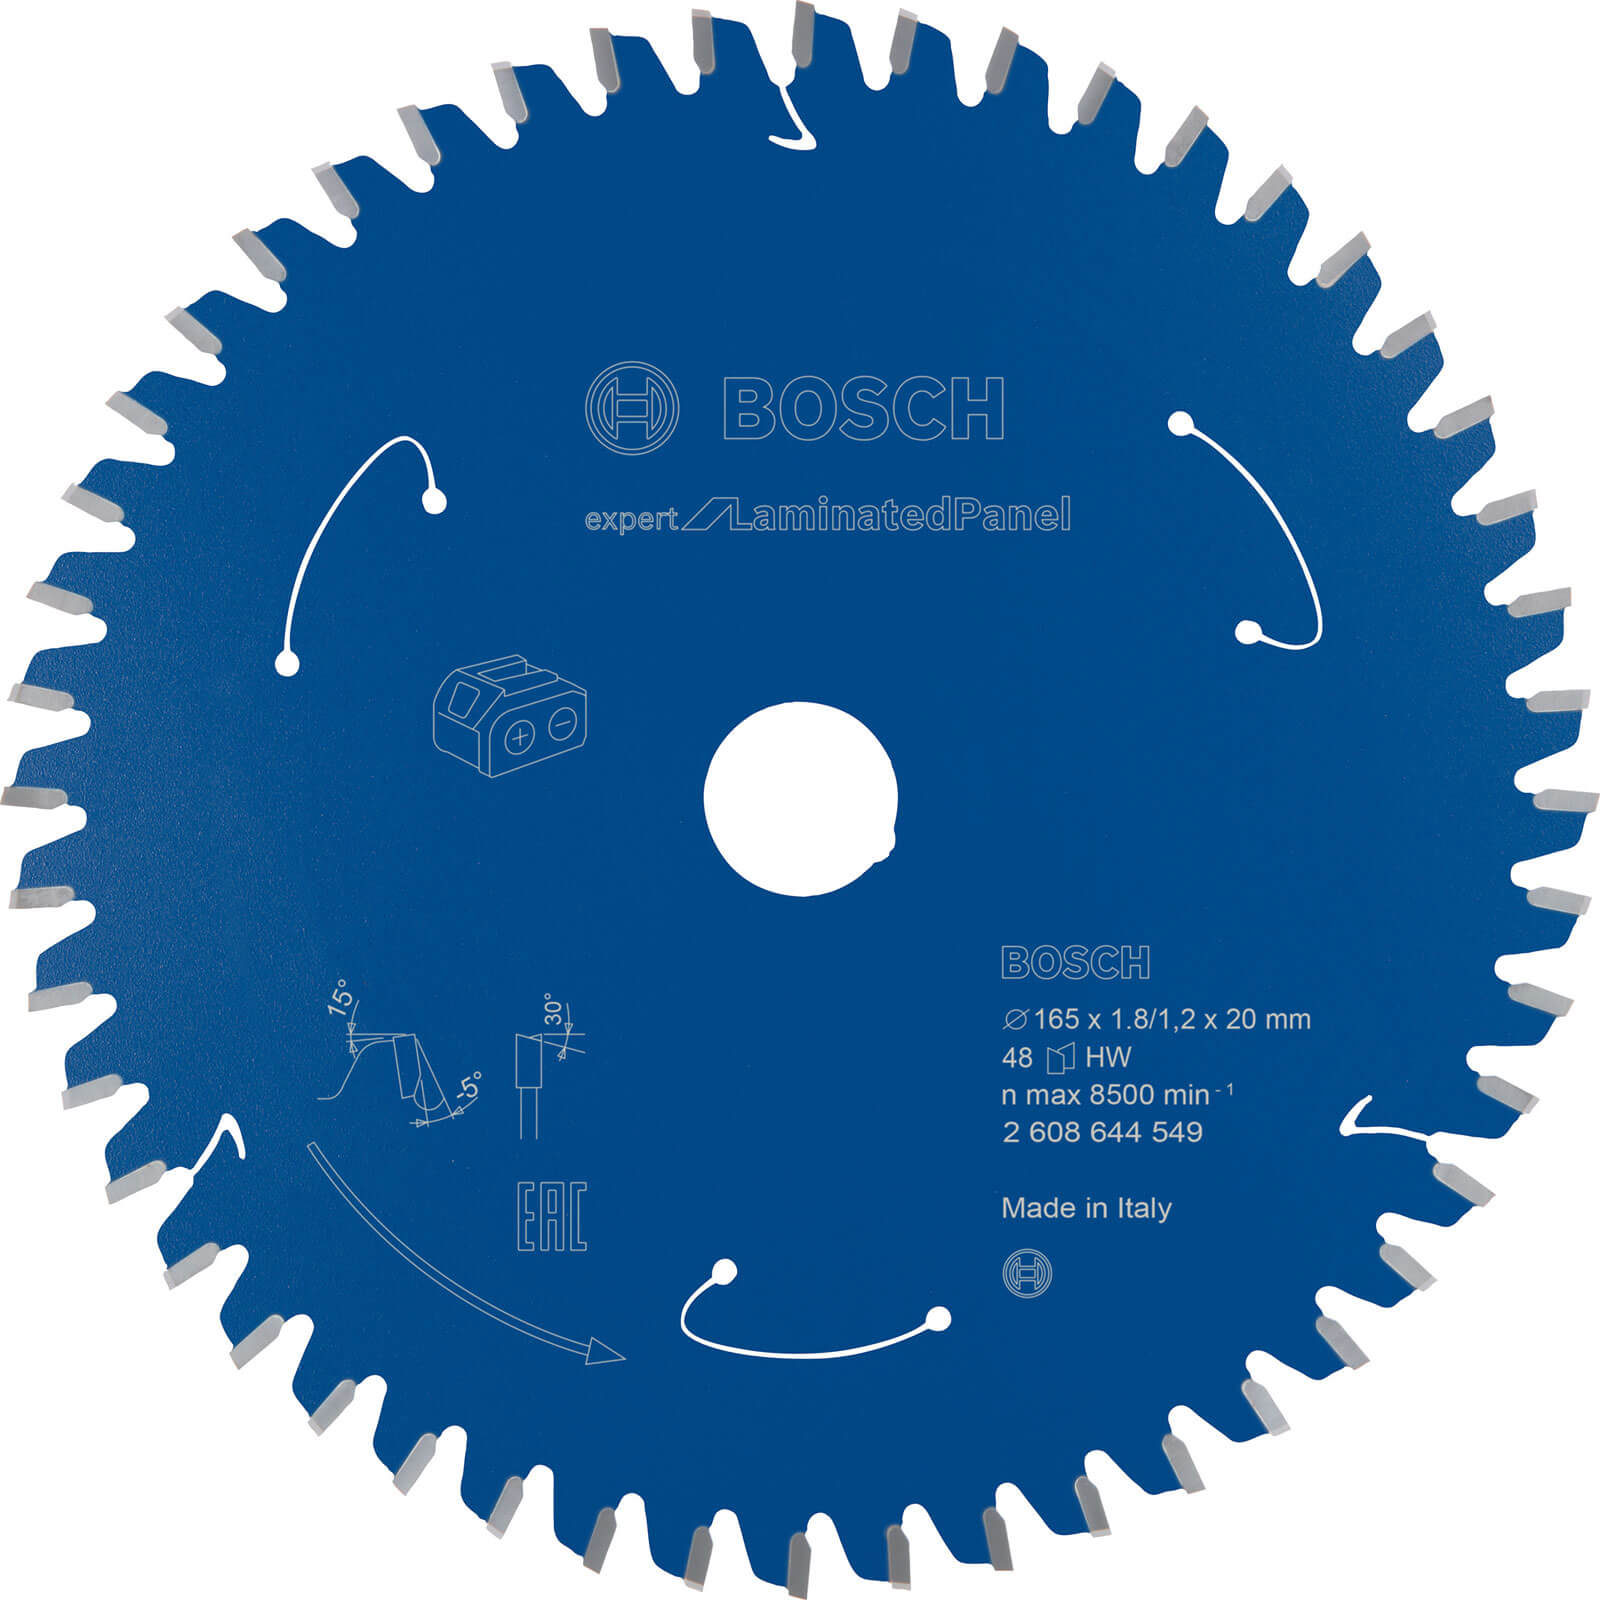 Photos - Power Tool Accessory Bosch Expert Cordless Circular Saw Blade for Laminate Panel 165mm 48T 20mm 